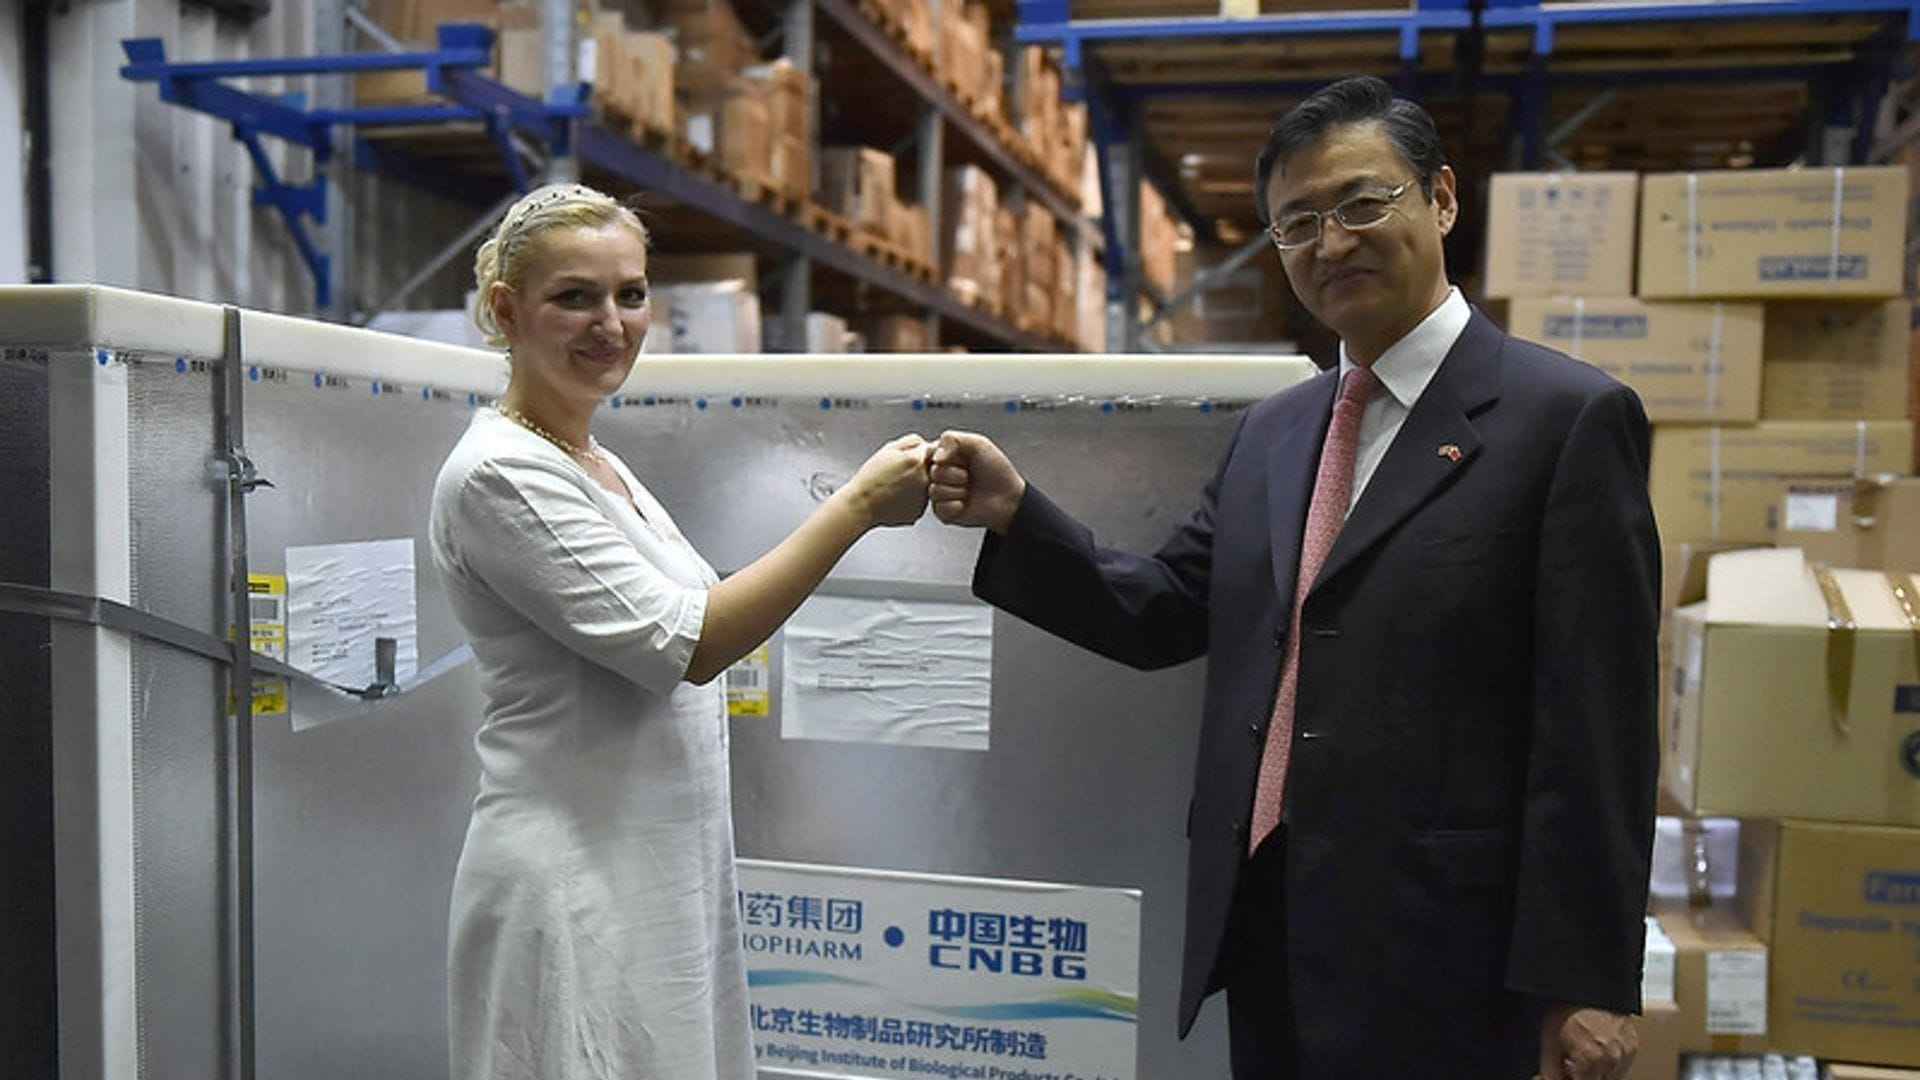 Photo: Montenegrin Minister of Health Jelena Borovinić Bojović and the Ambassador Extraordinary and Plenipotentiary of the People's Republic of China to Montenegro, H.E. Liu Jin welcome 200,000 Sinopharm vaccines in Montenegro.